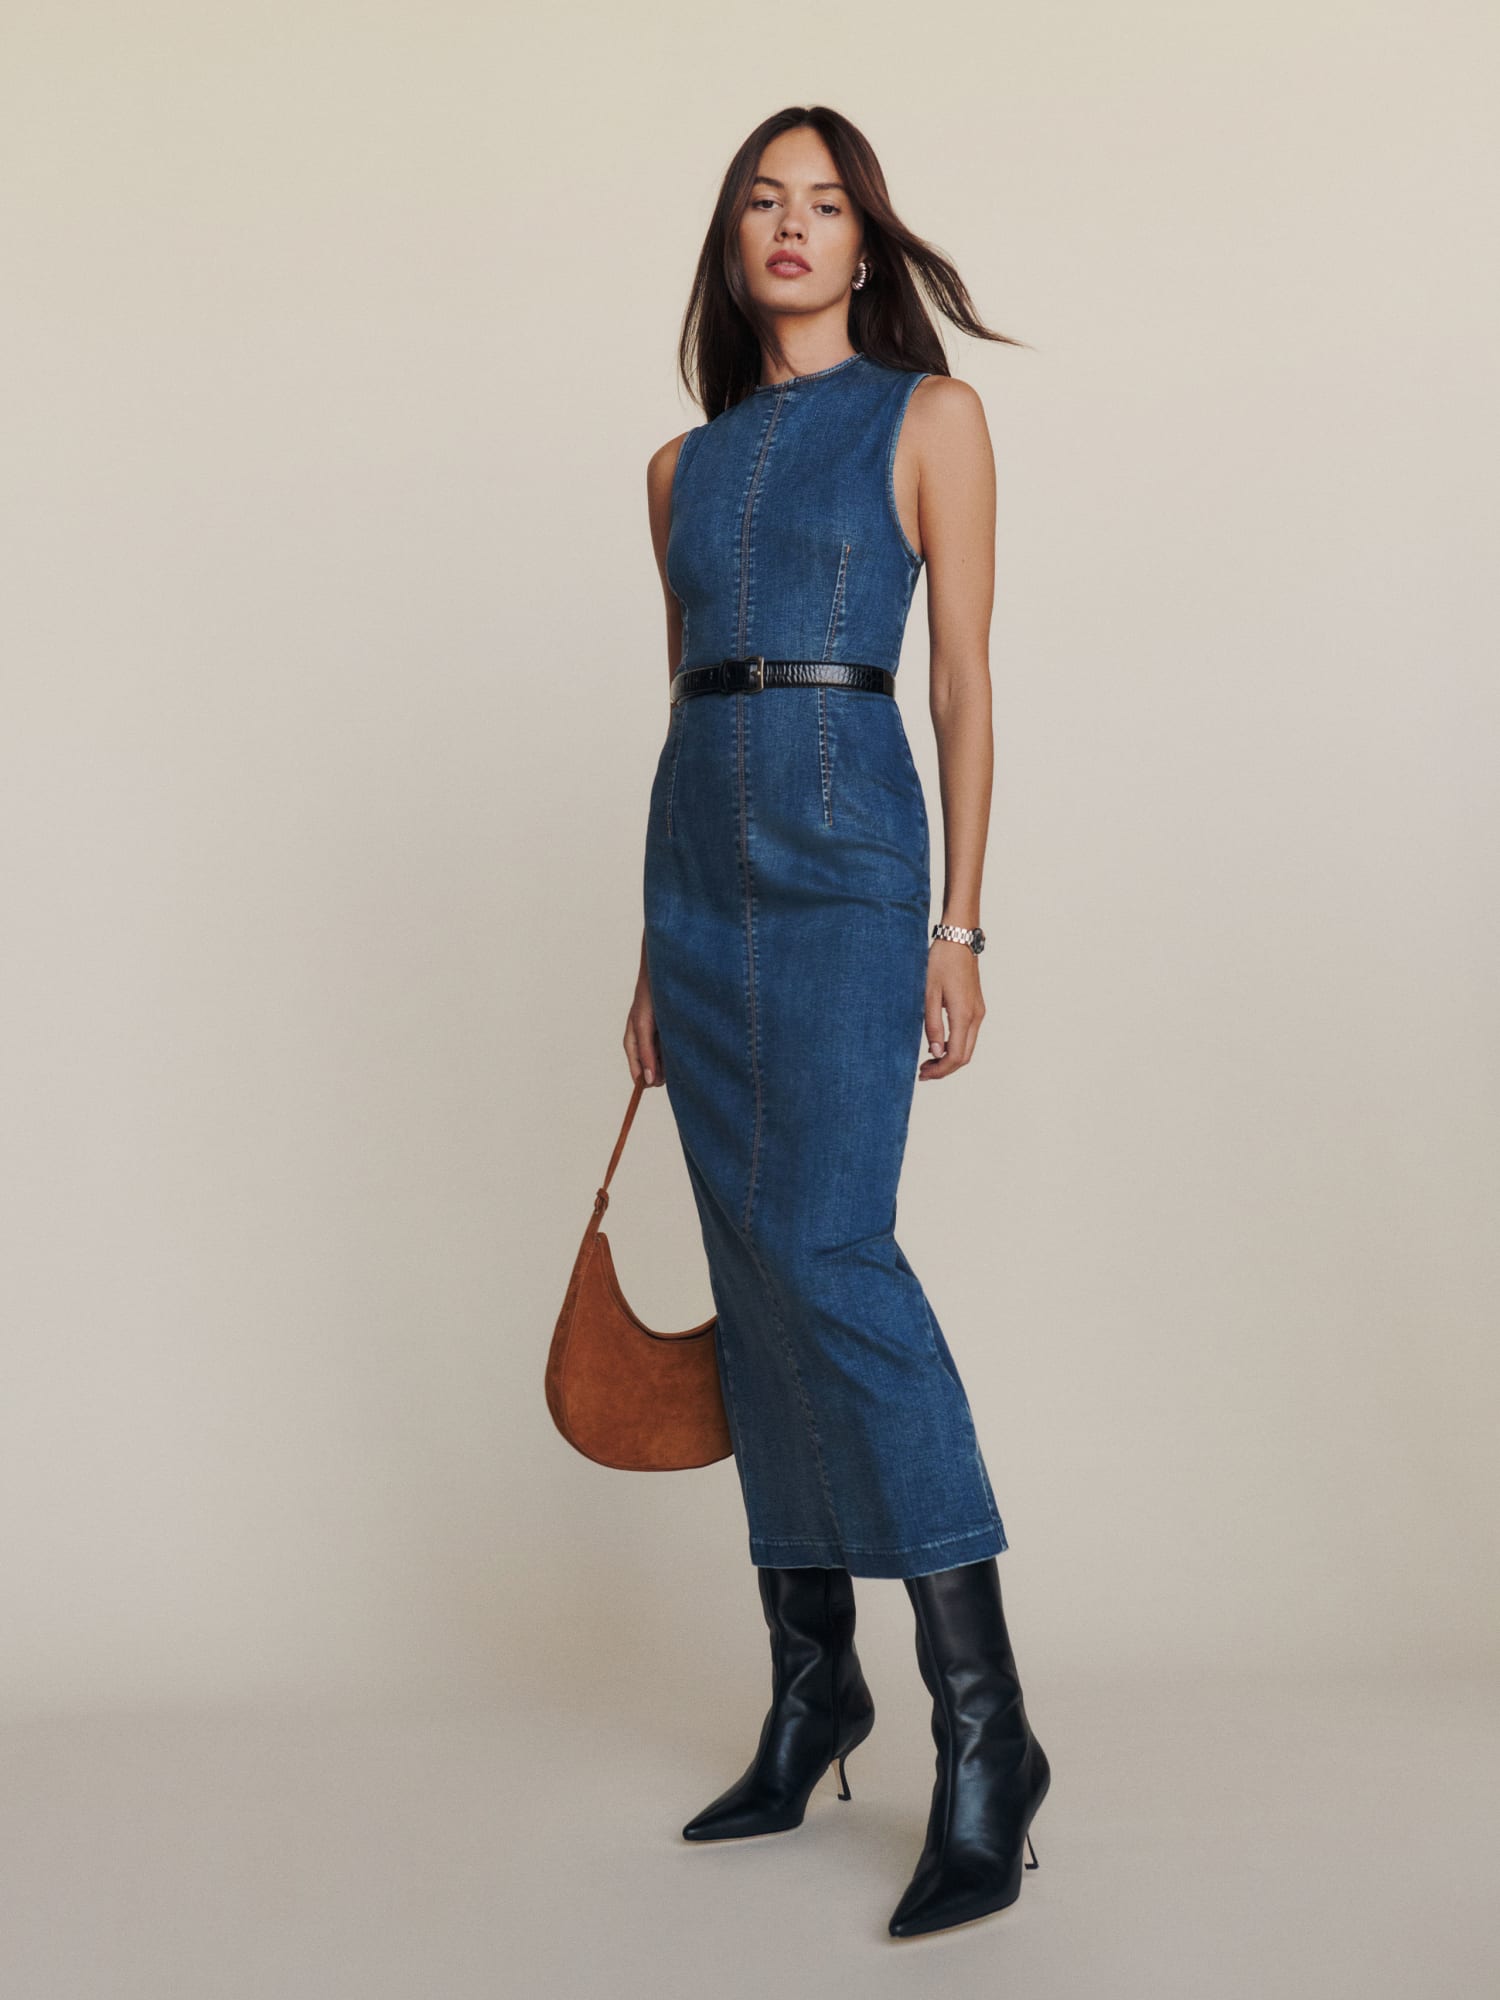 Reformation Dresses - Size Inclusive and Sustainable Too! - Denim Is the  New Black